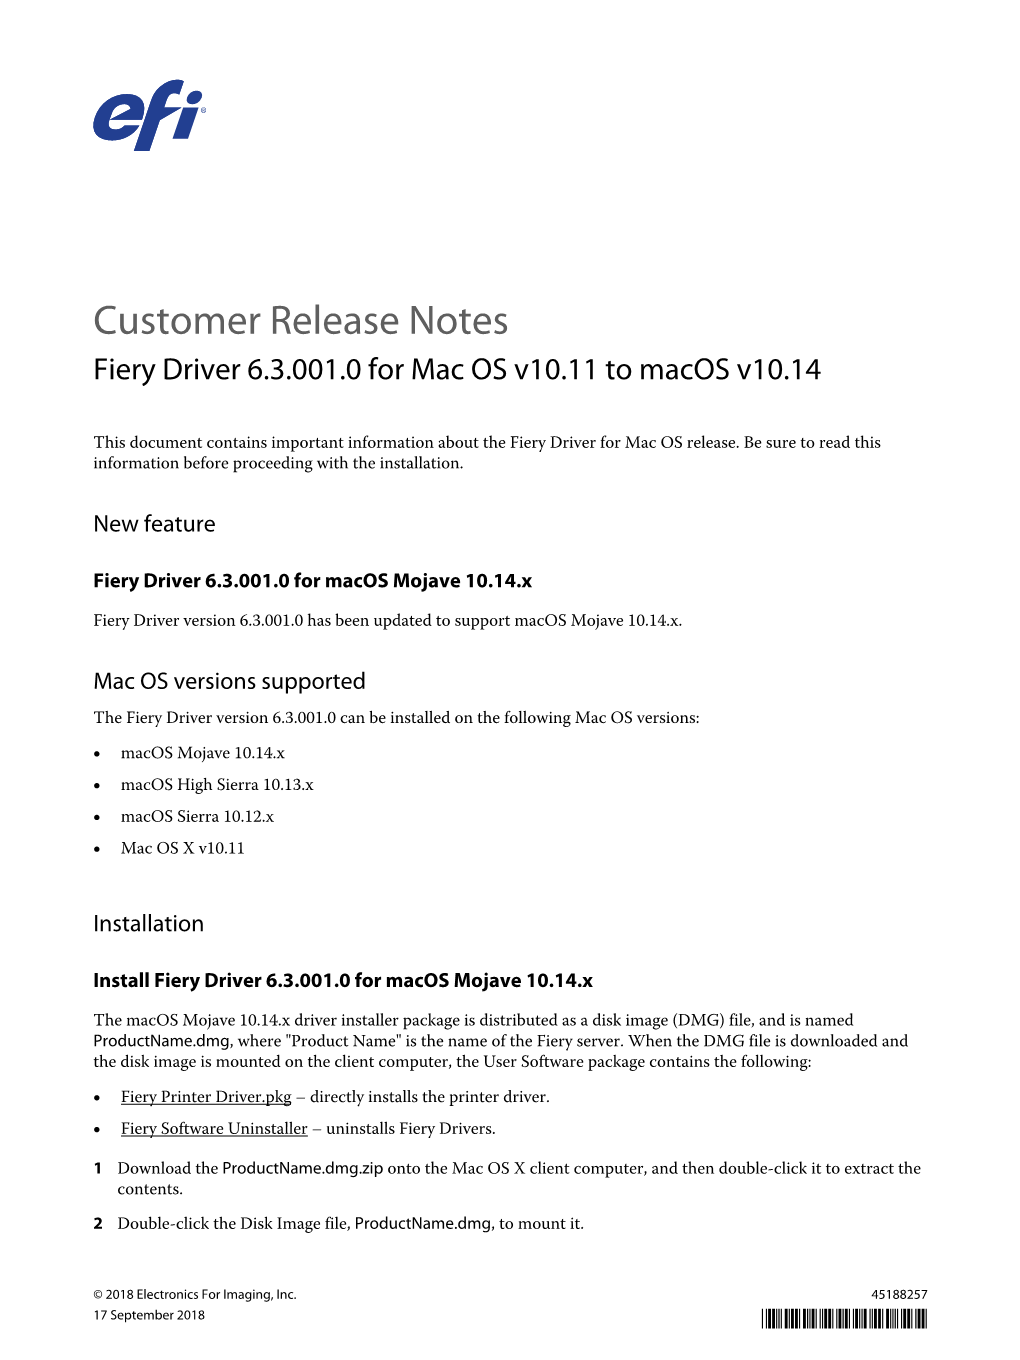 Customer Release Notes Fiery Driver 6.3.001.0 for Mac OS V10.11 to Macos V10.14